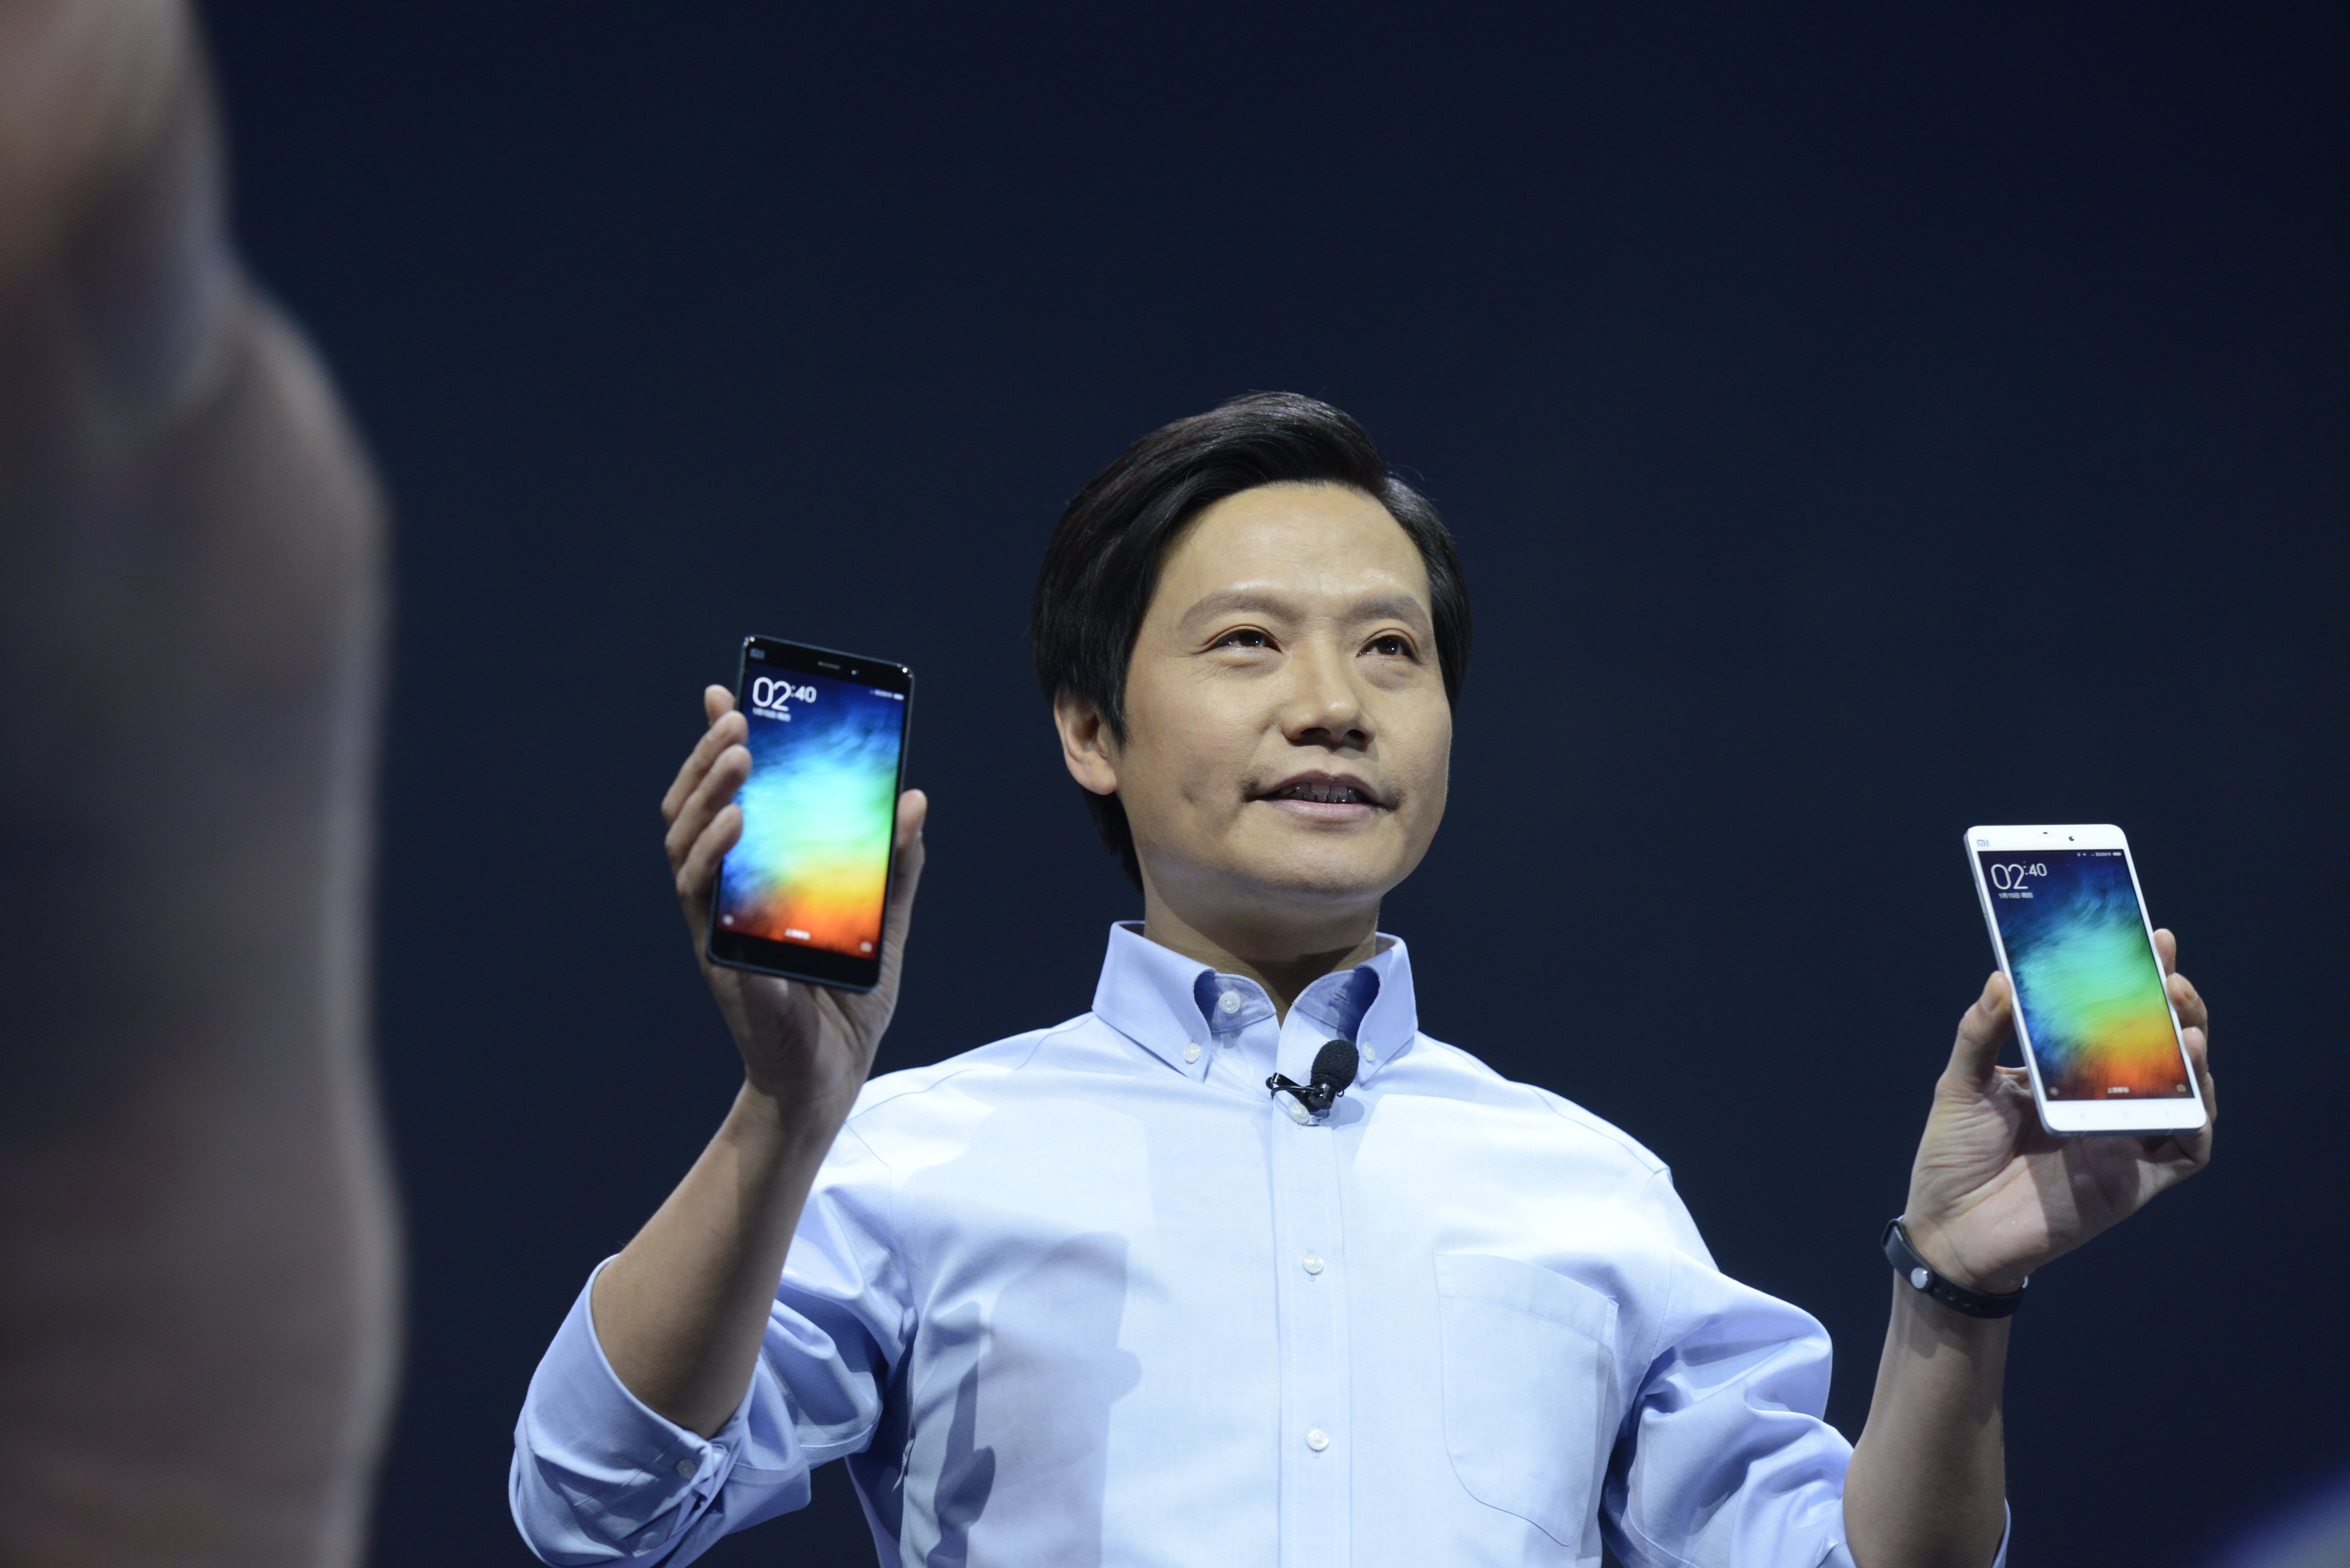 Lei Jun, chairman and CEO of China's Xiaomi Inc. presents the company's new product, the Mi Note on Jan. 15, 2015 in Beijing, China. (ChinaFotoPress via Getty Images)